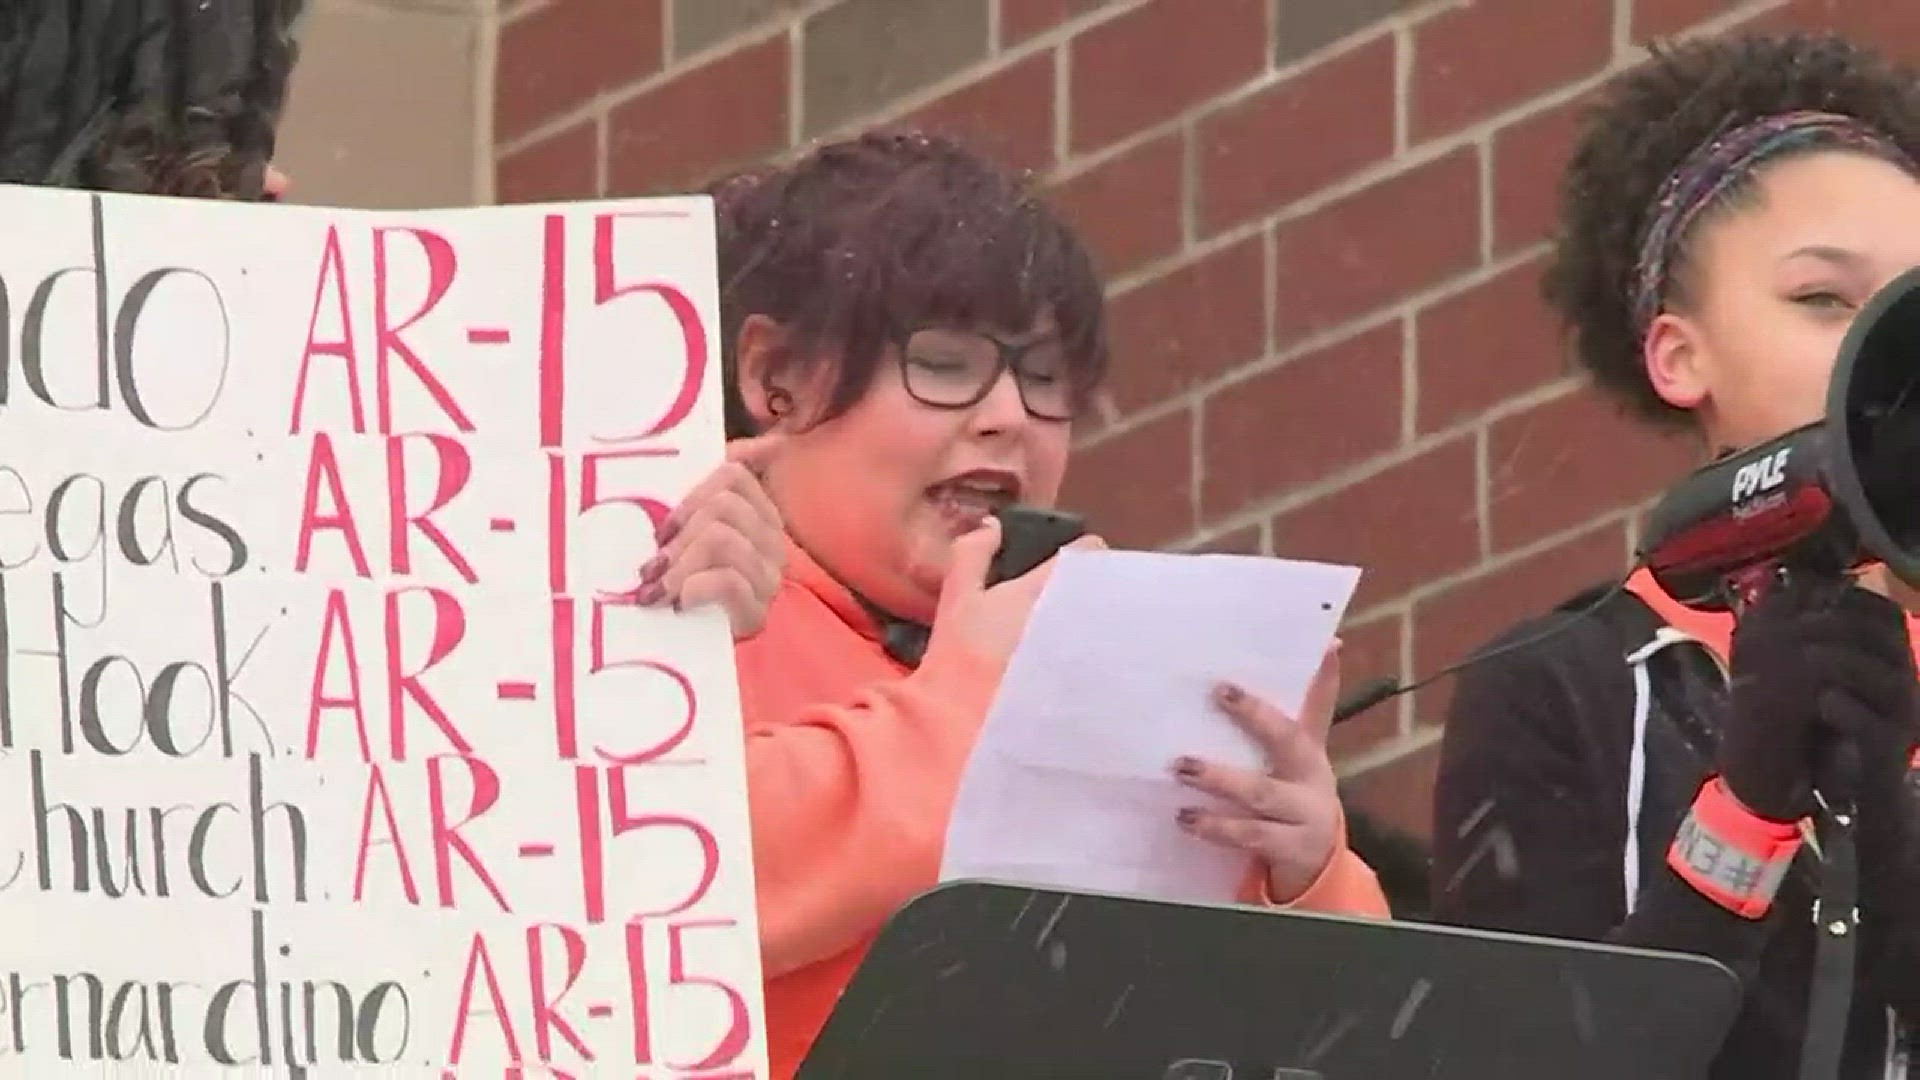 March 14, 2018: A student at Firestone High School in Akron delivered a speech to her peers directed at President Trump to put a stop to gun violence.